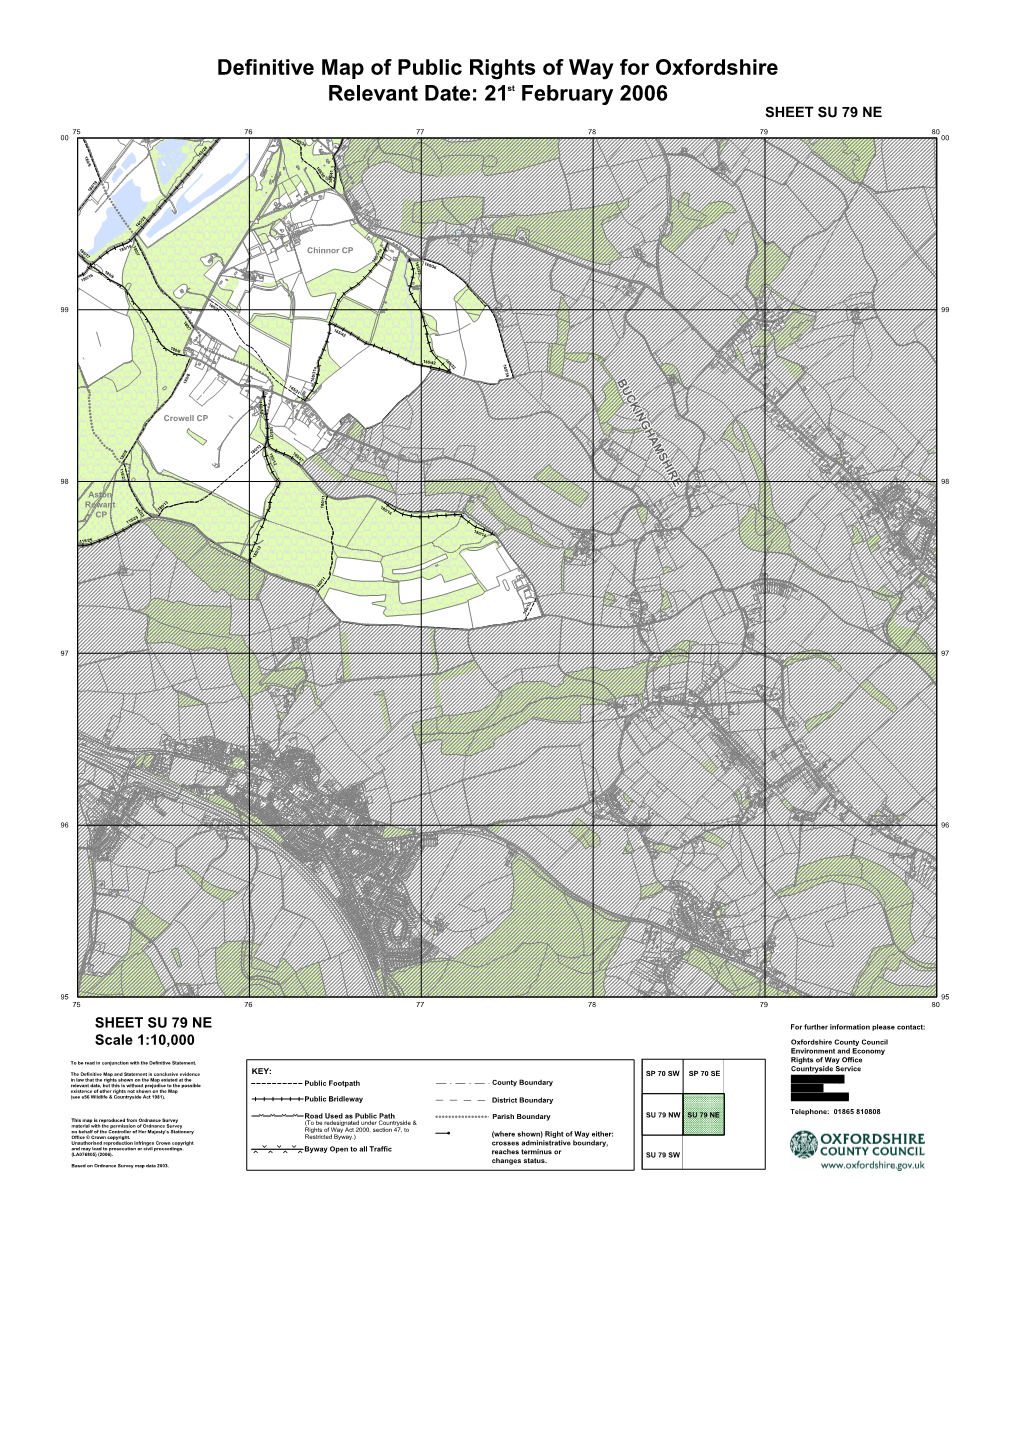 Definitive Map of Public Rights of Way for Oxfordshire Relevant Date: 21St February 2006 Colour SHEET SU 79 NE